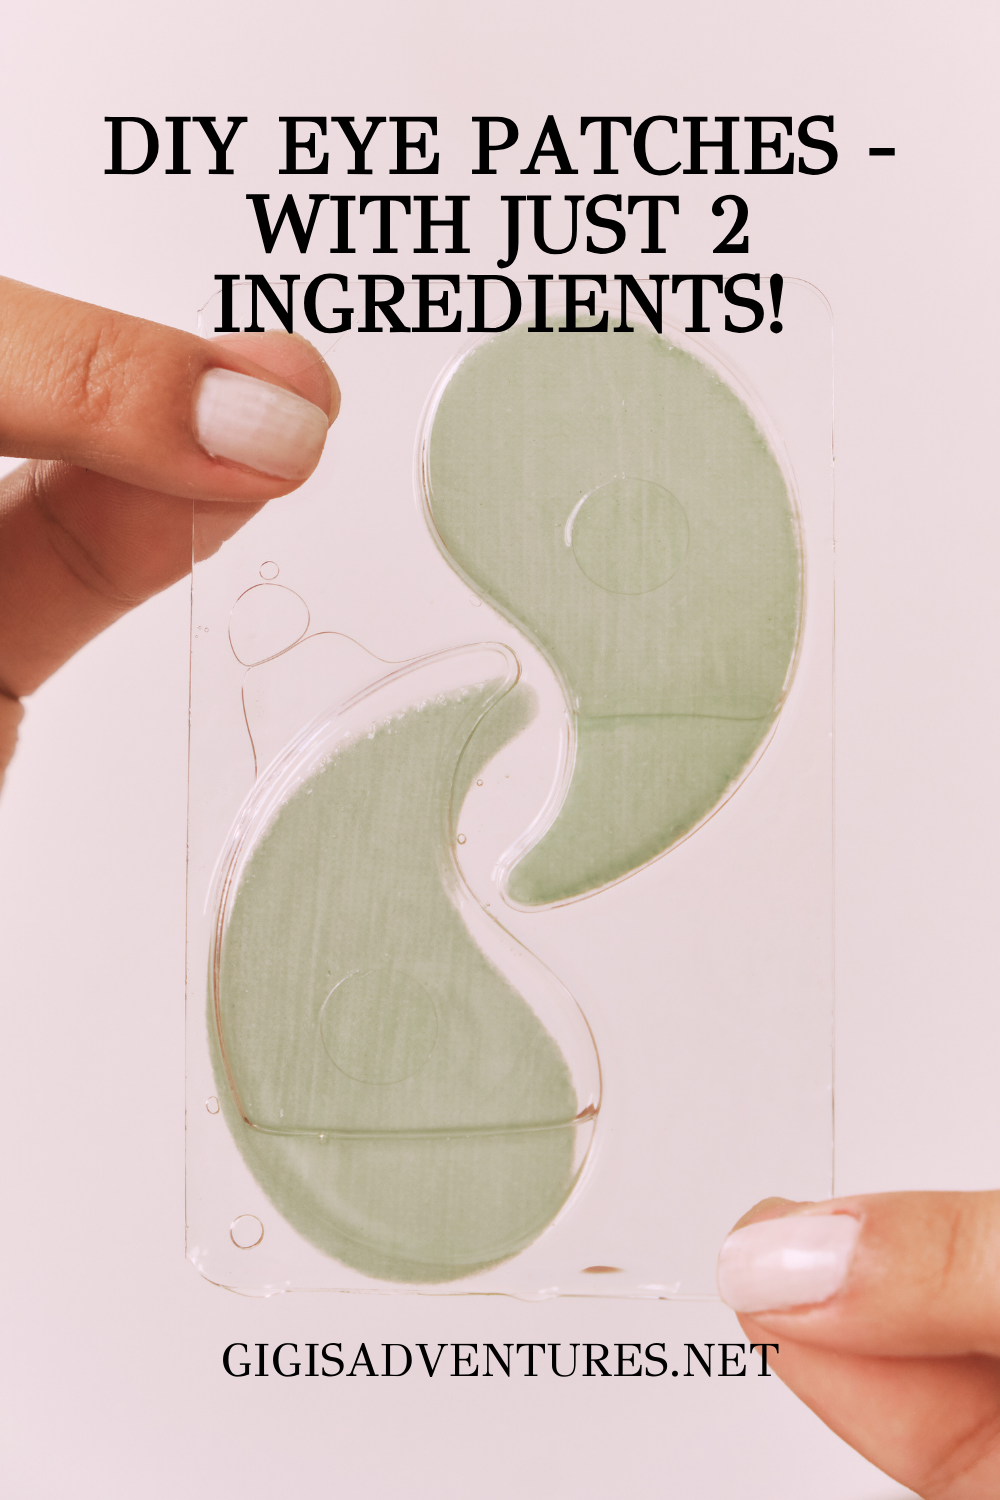 DIY Eye Patches - With Just 2 Ingredients!